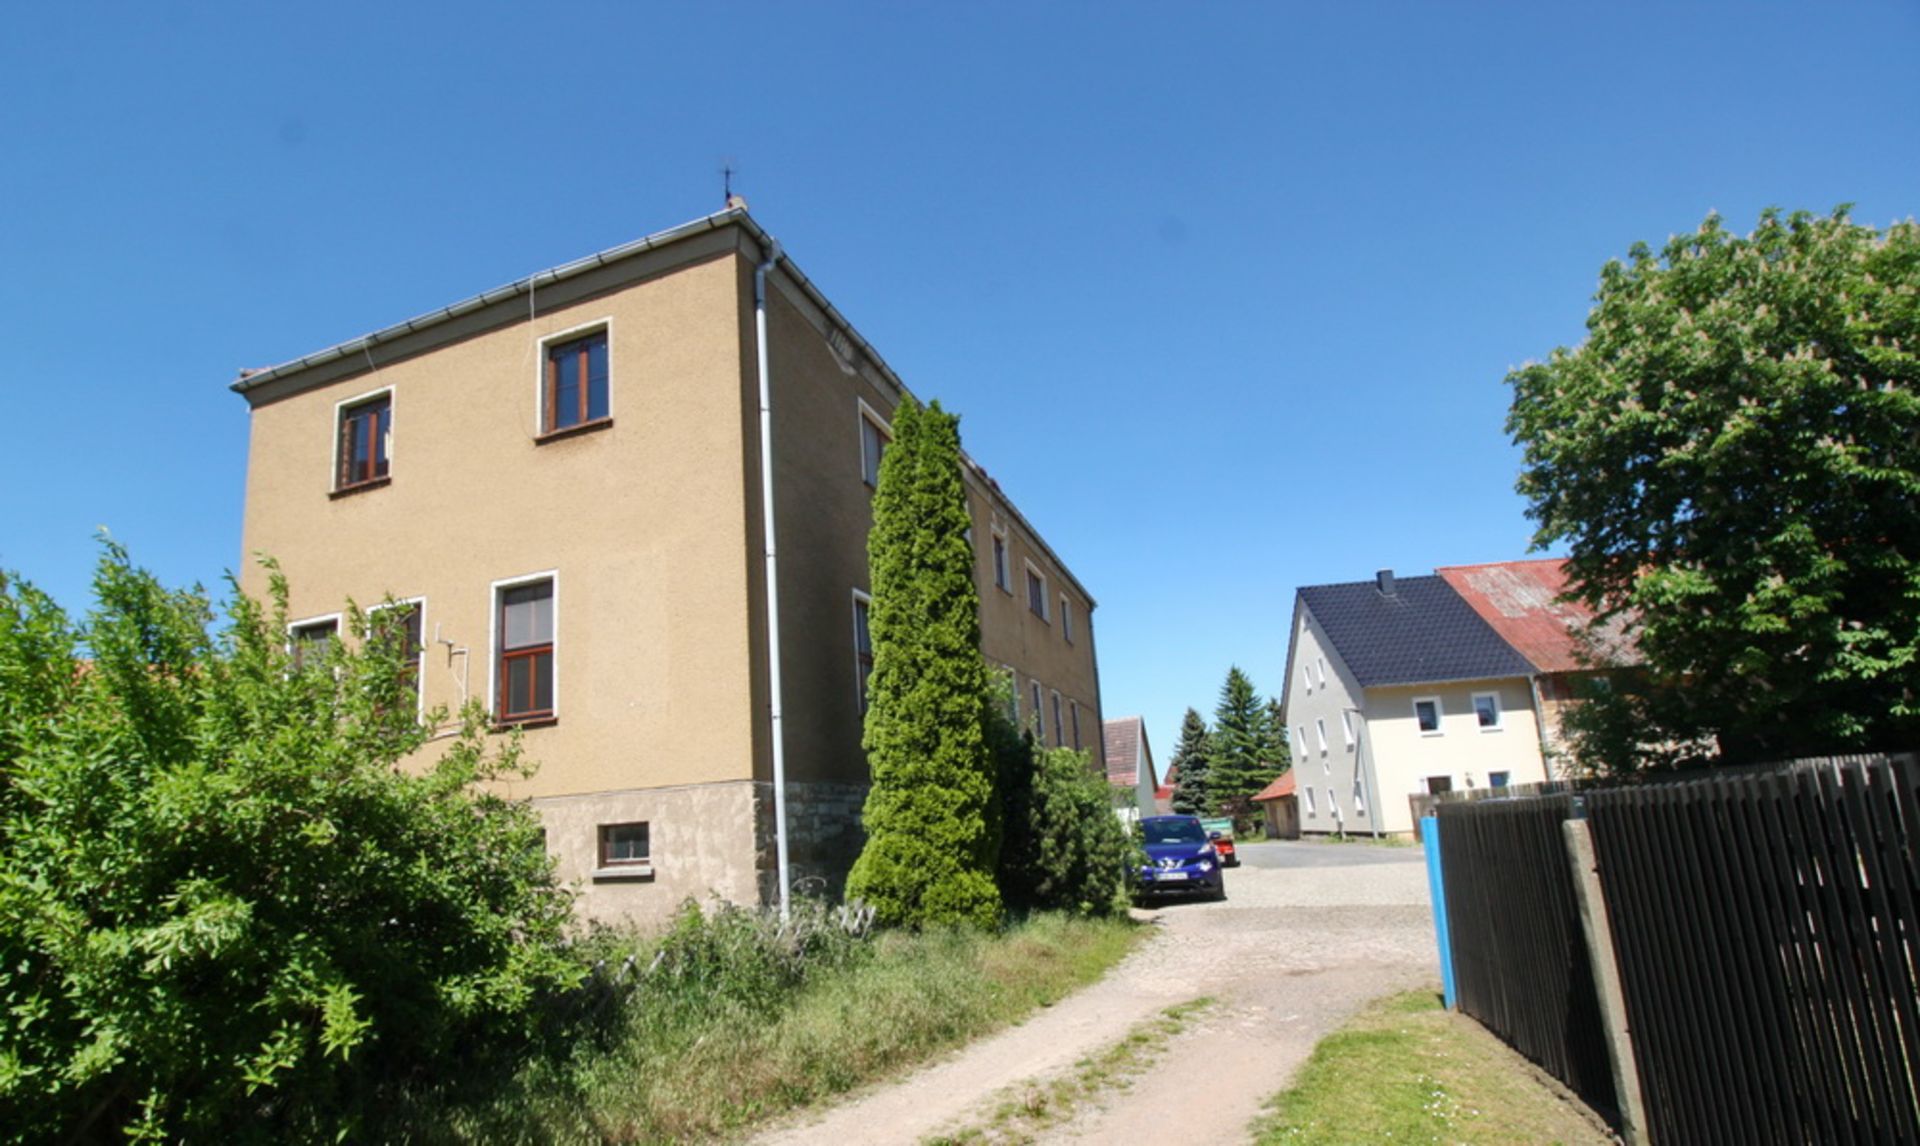 LARGE HOUSING BLOCK IN HORNSOMMEM, GERMANY - READY TO MOVE INTO - Image 26 of 91